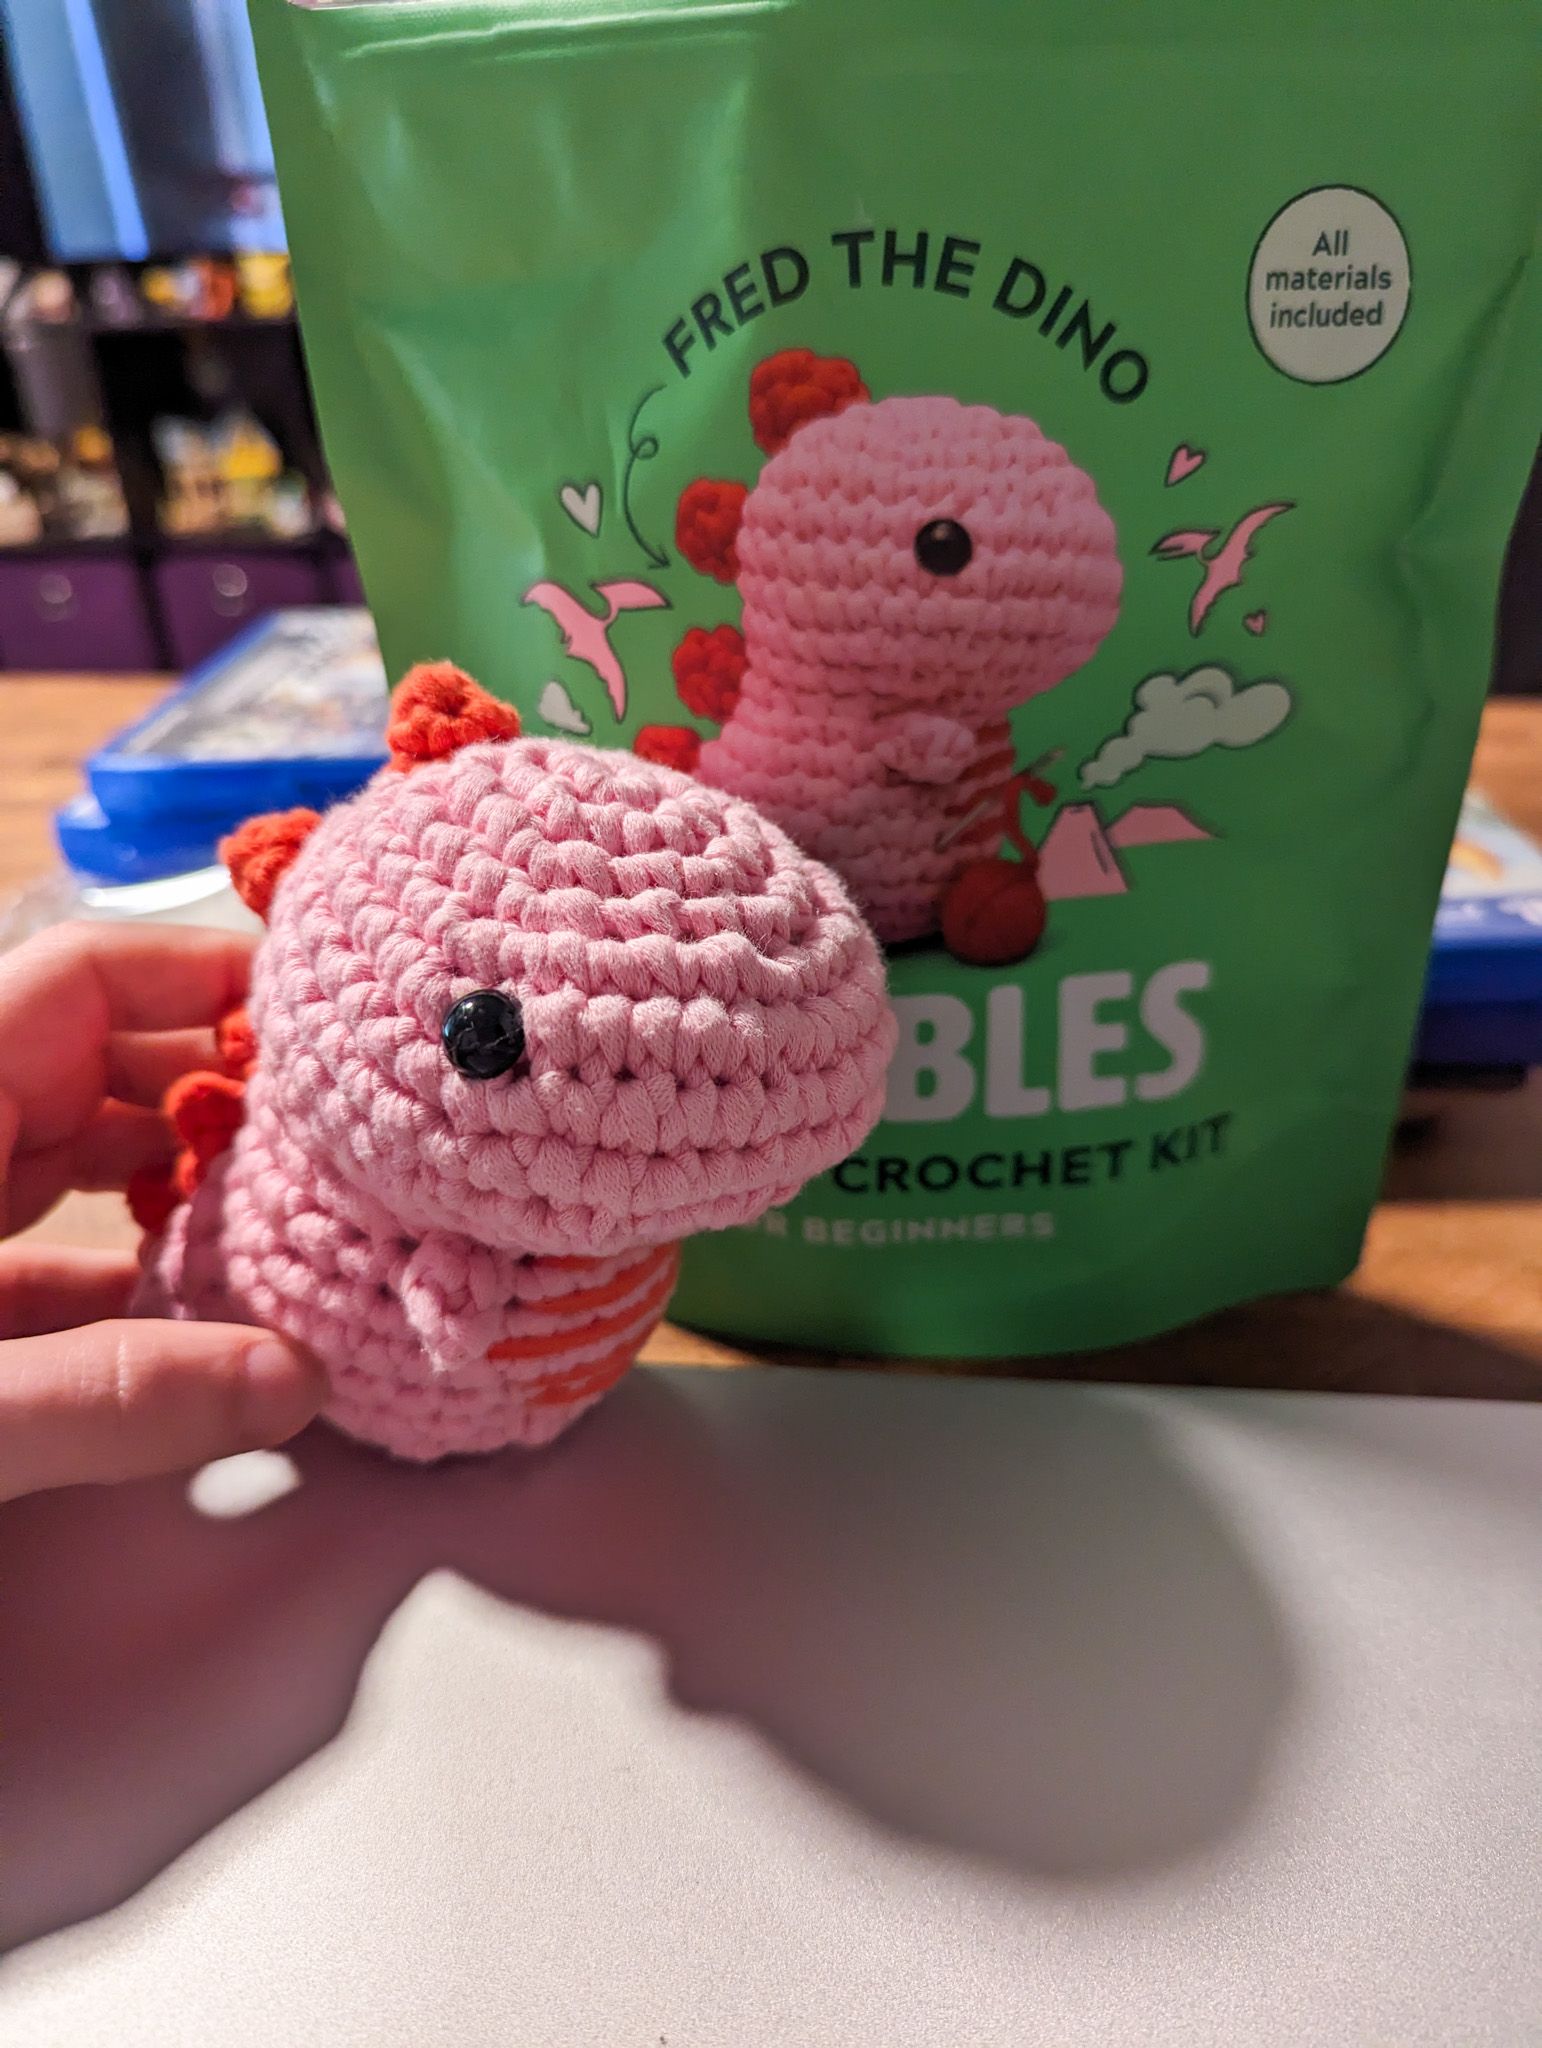 Learning to Crochet: Woobles and Fleece Blankets